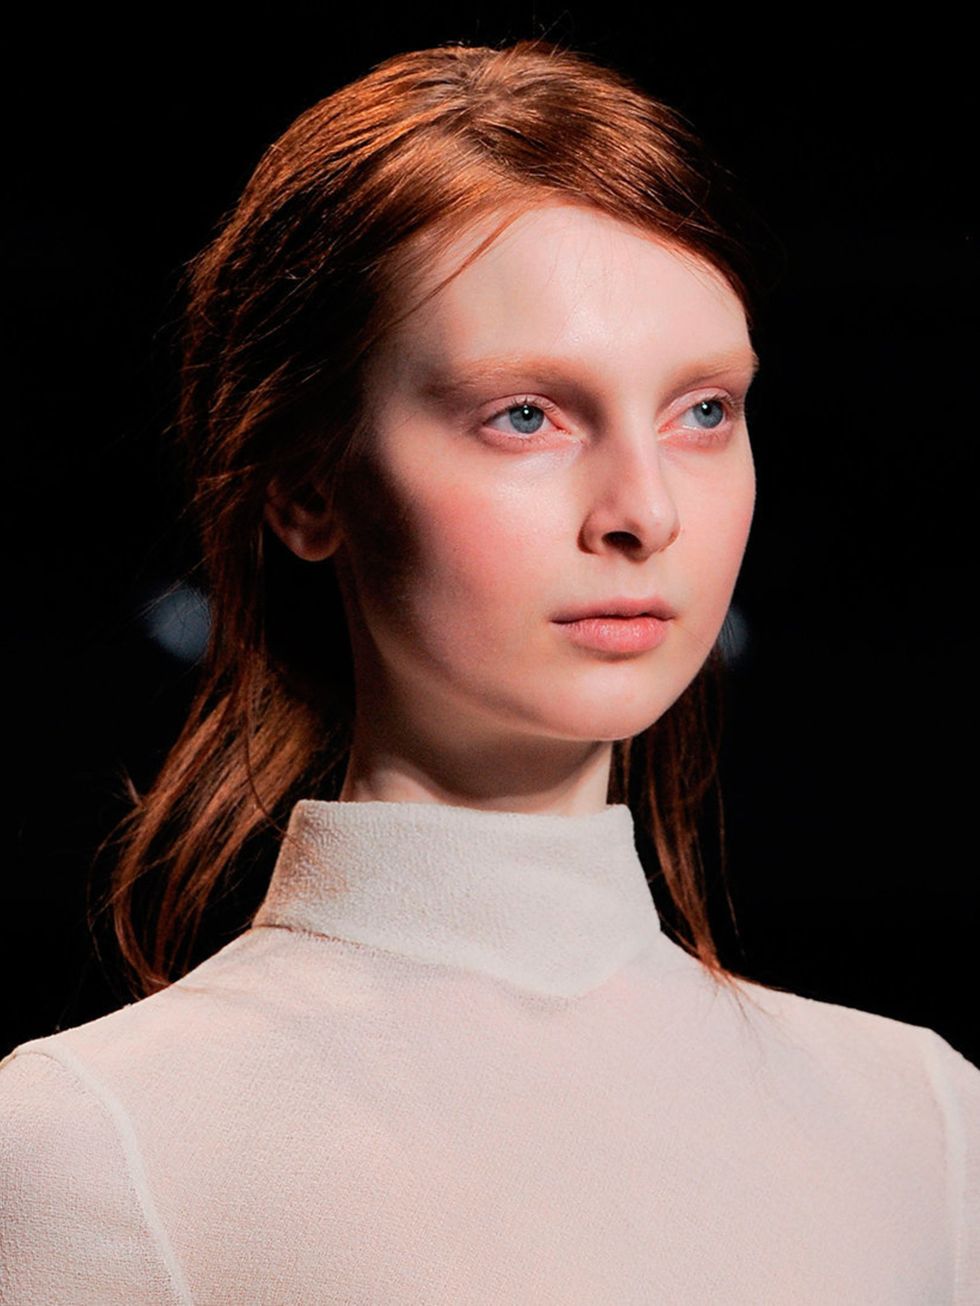 &lt;p&gt;Make-up Artist: Alex Box for Mac&lt;/p&gt;&lt;p&gt;Look: No make-up&lt;/p&gt;&lt;p&gt;Inspiration: The Verge - a girl about to become a woman - she has no awareness of her beauty&lt;/p&gt;&lt;p&gt;Key Product: AW Forecast Palette - Close to You a